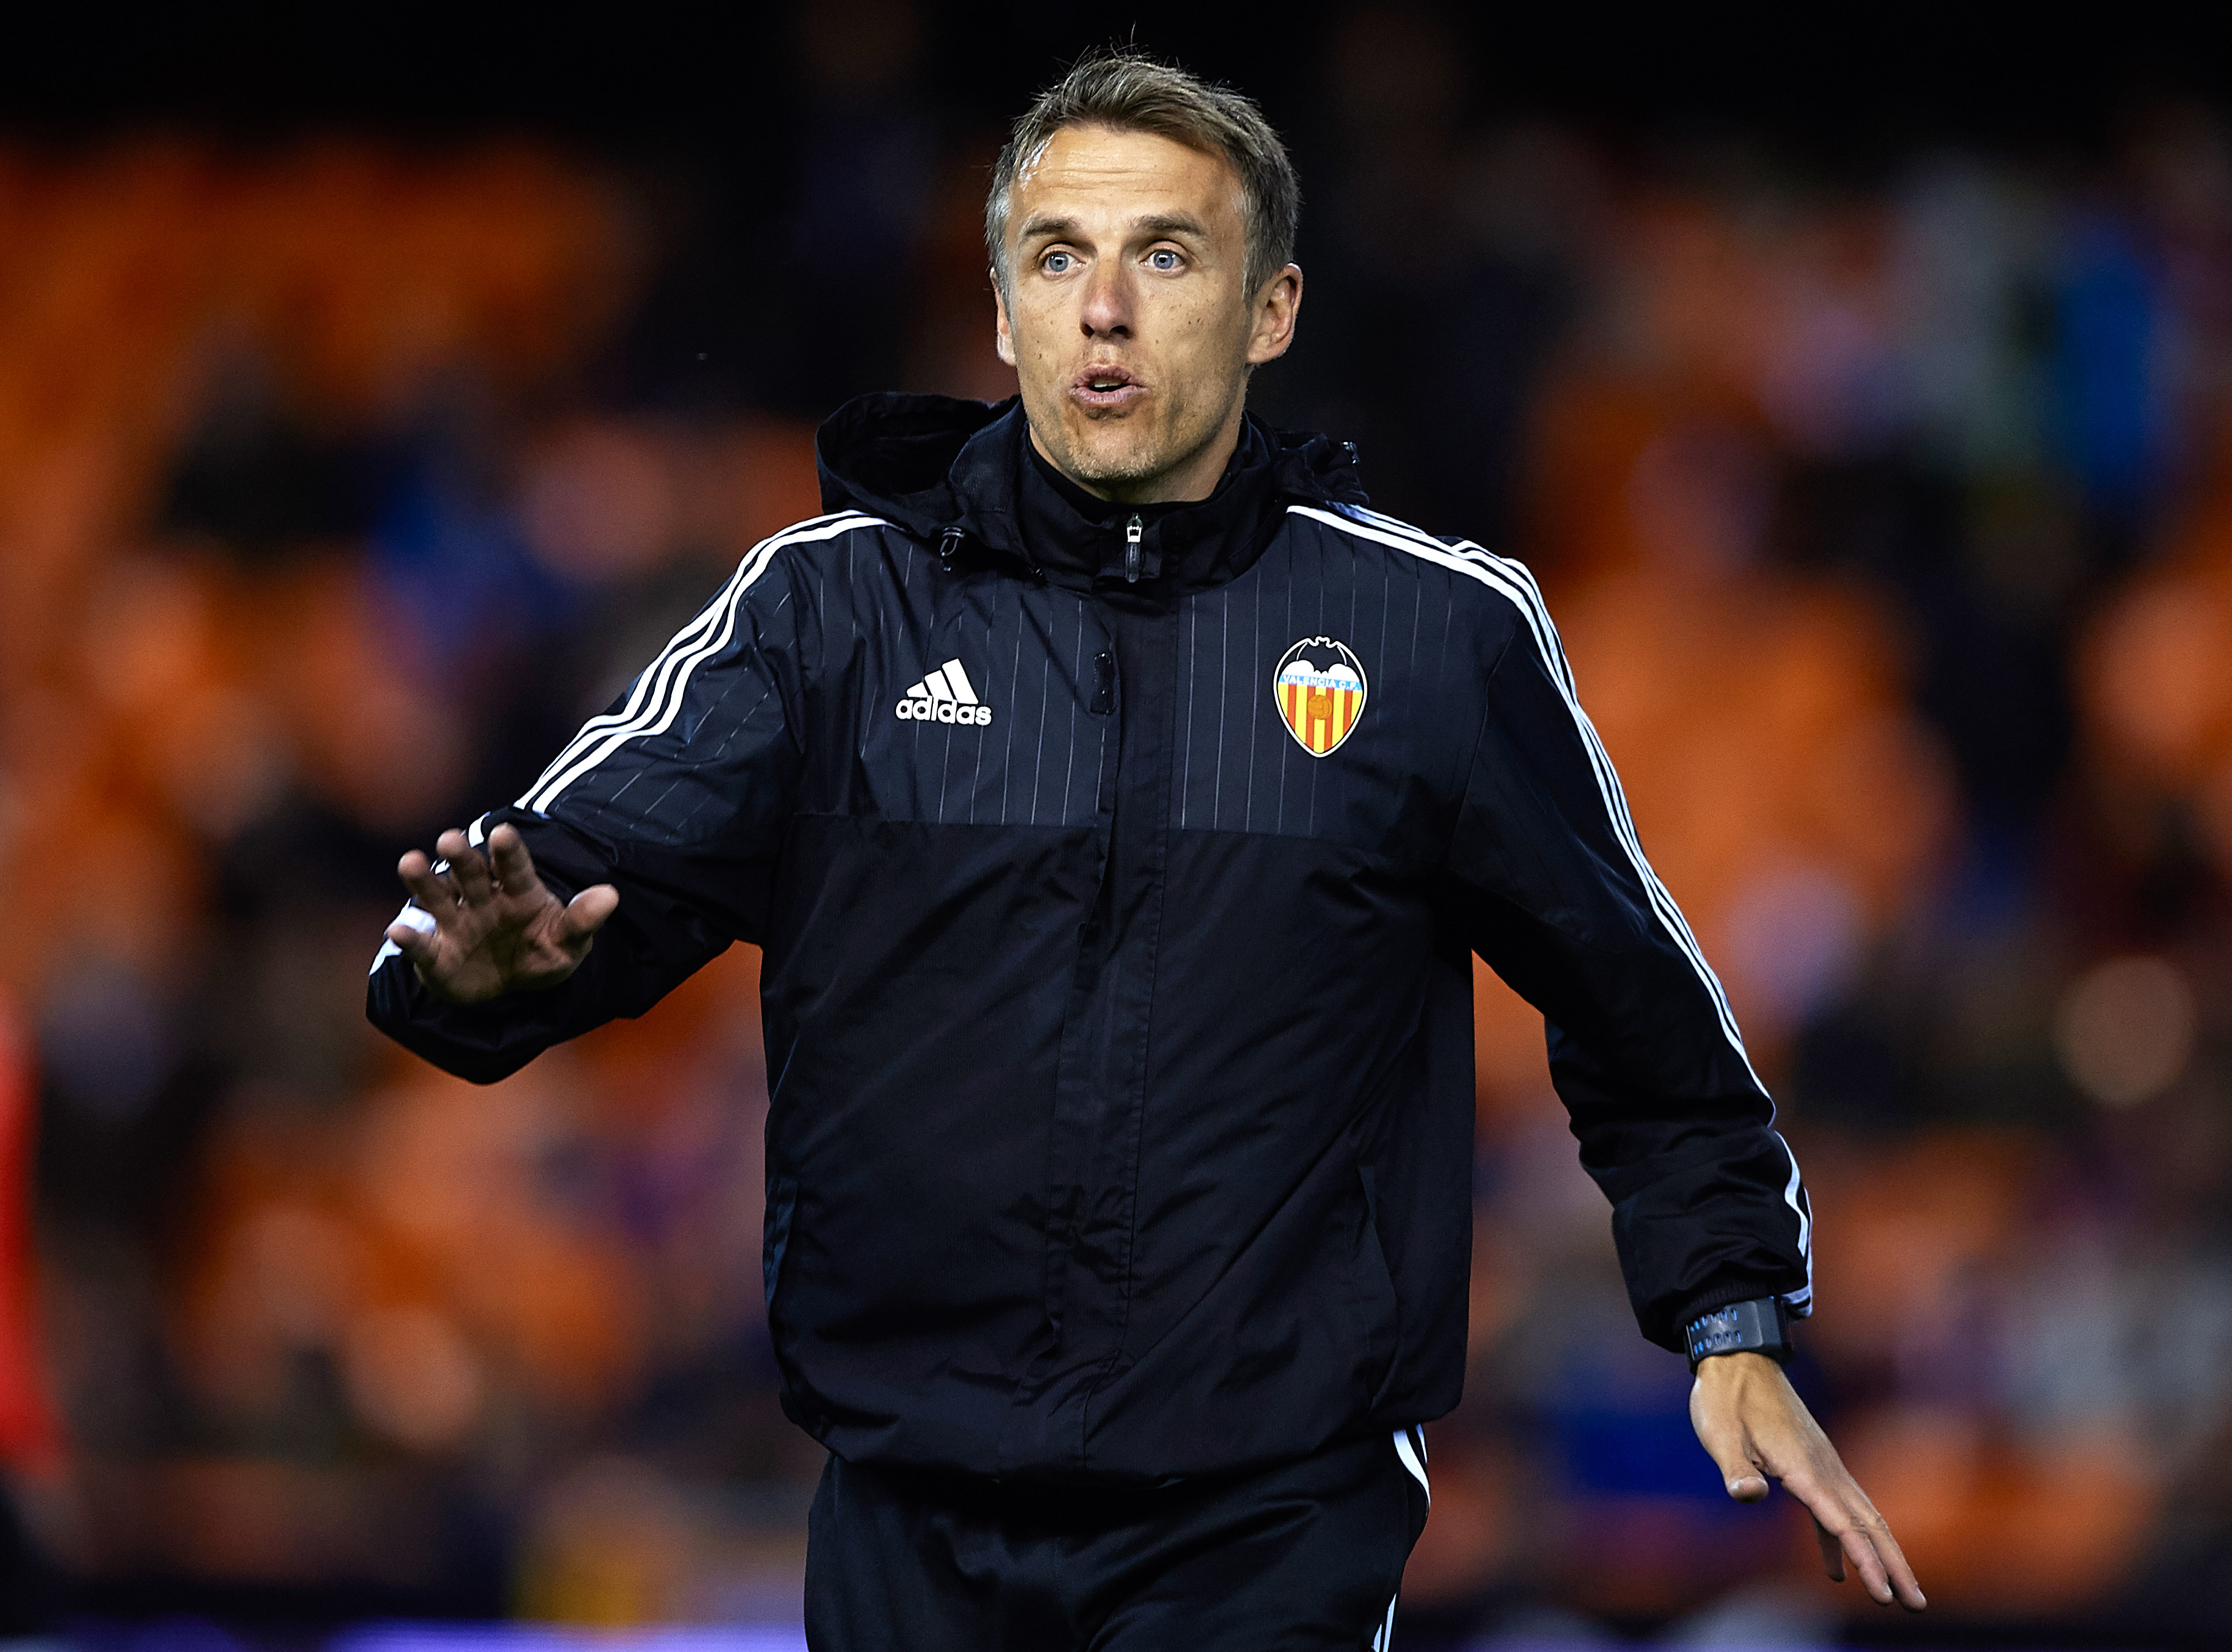 VALENCIA, SPAIN - MARCH 06:  Valencia CF assistant coach Phil Neville gives instructions prior to the La Liga match between Valencia CF and Atletico de Madrid at Estadi de Mestalla on March 06, 2016 in Valencia, Spain.  (Photo by Manuel Queimadelos Alonso/Getty Images)